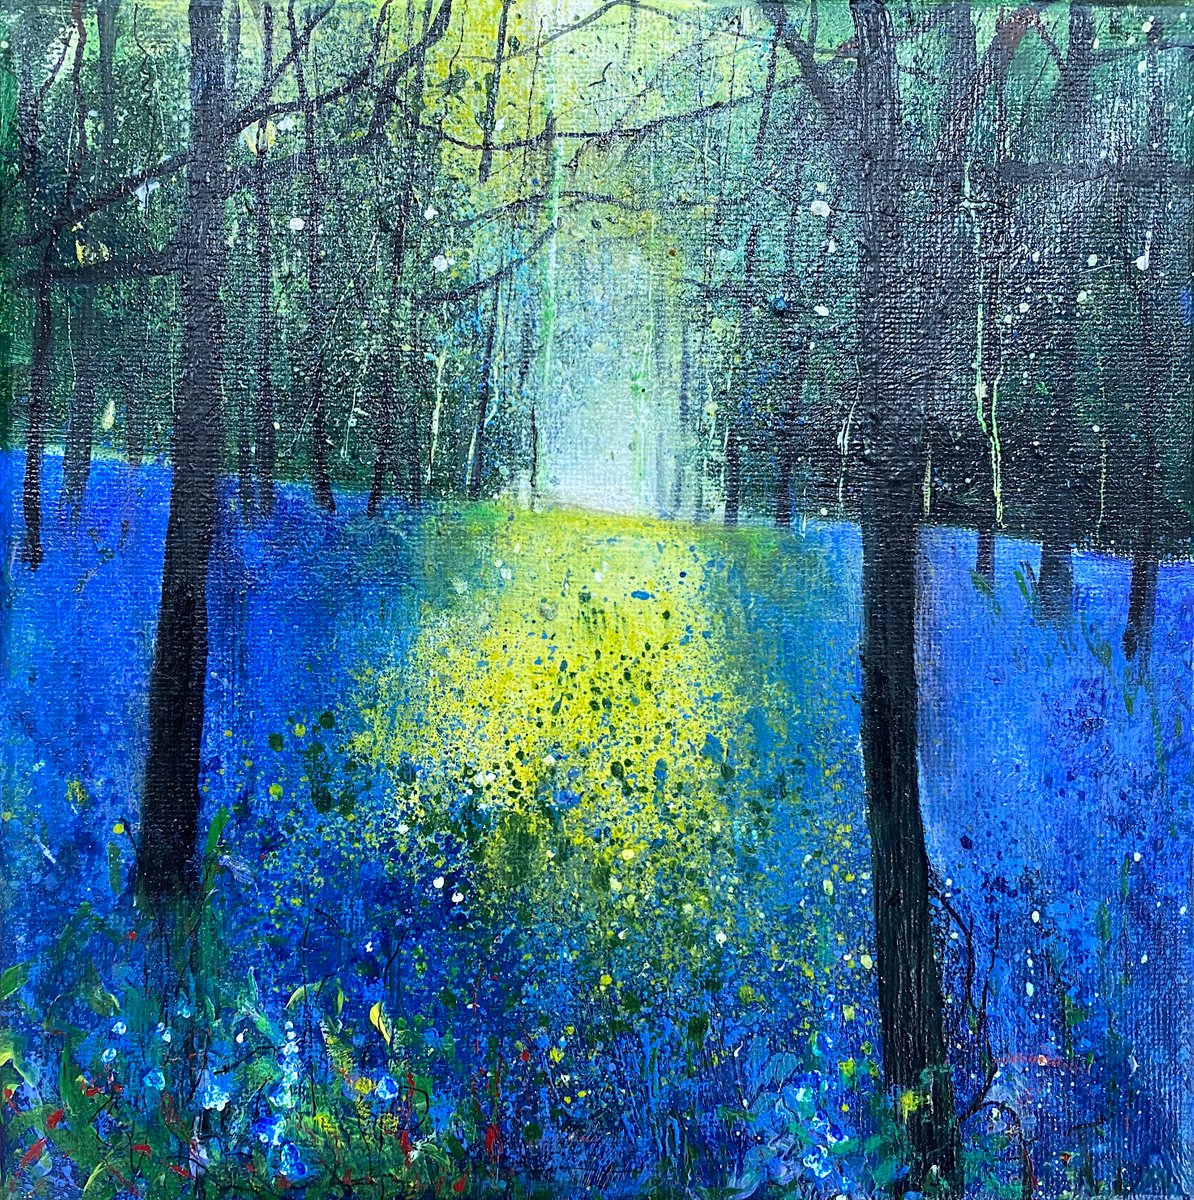 Seasons - Spring Bluebell Clearing Brambles by Teresa Tanner